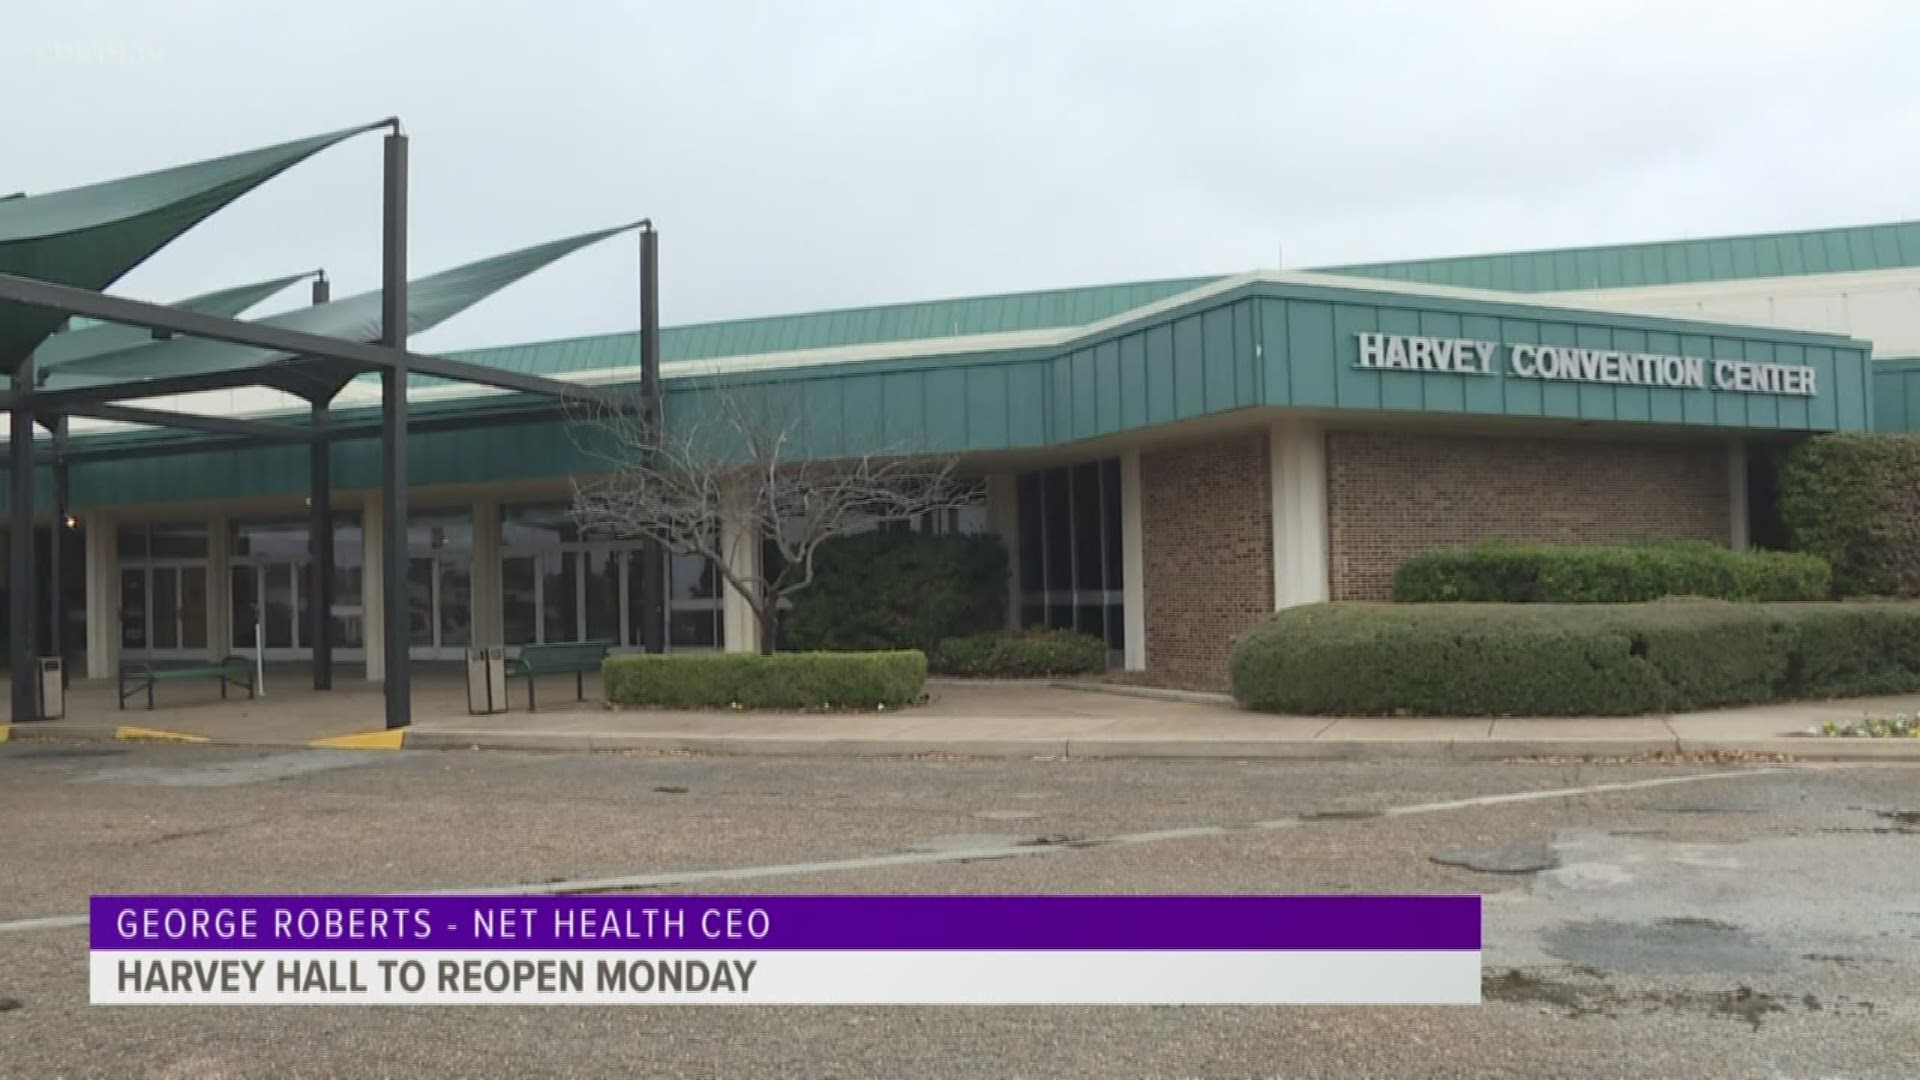 HARVEY HALL TO REOPEN MONDAY